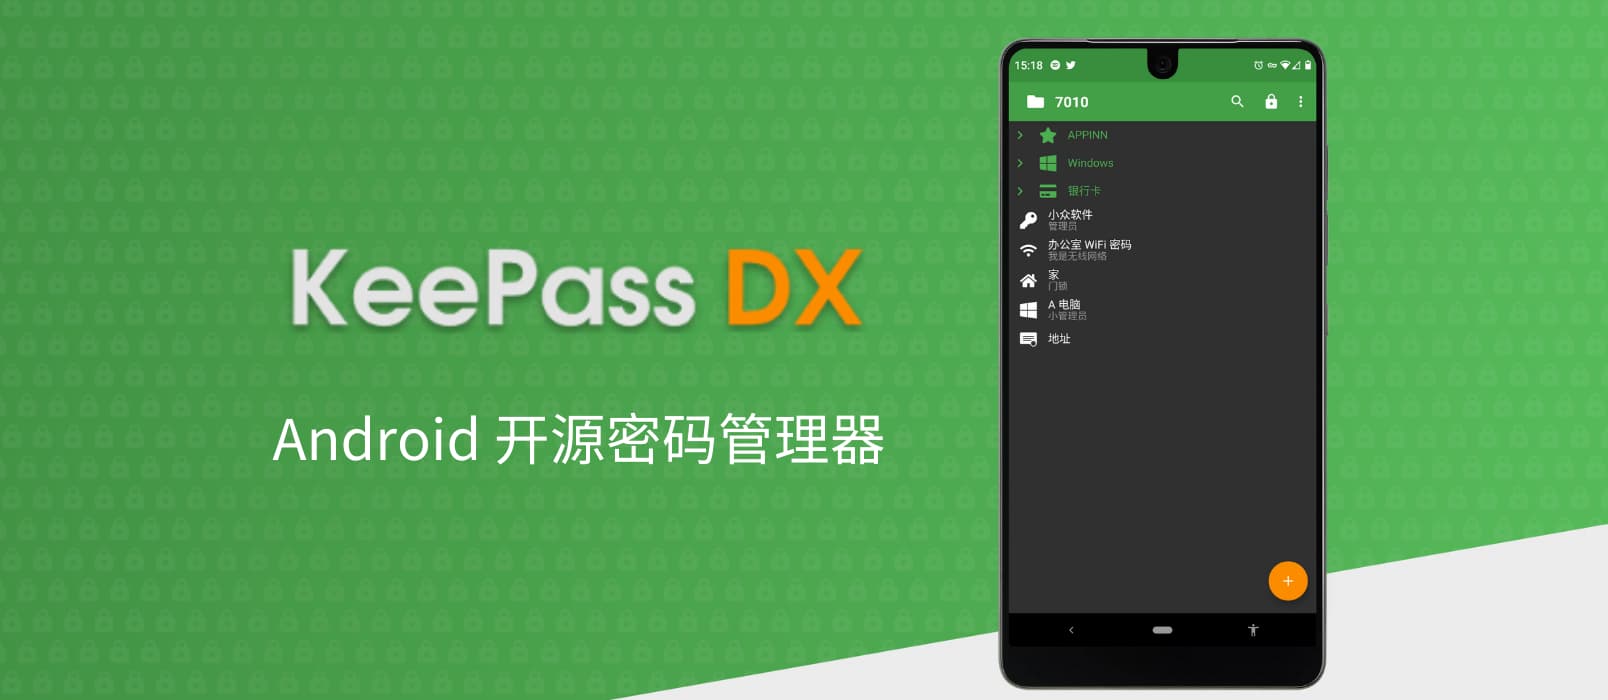 KeePass DX - 开源密码管理器[Android] 1